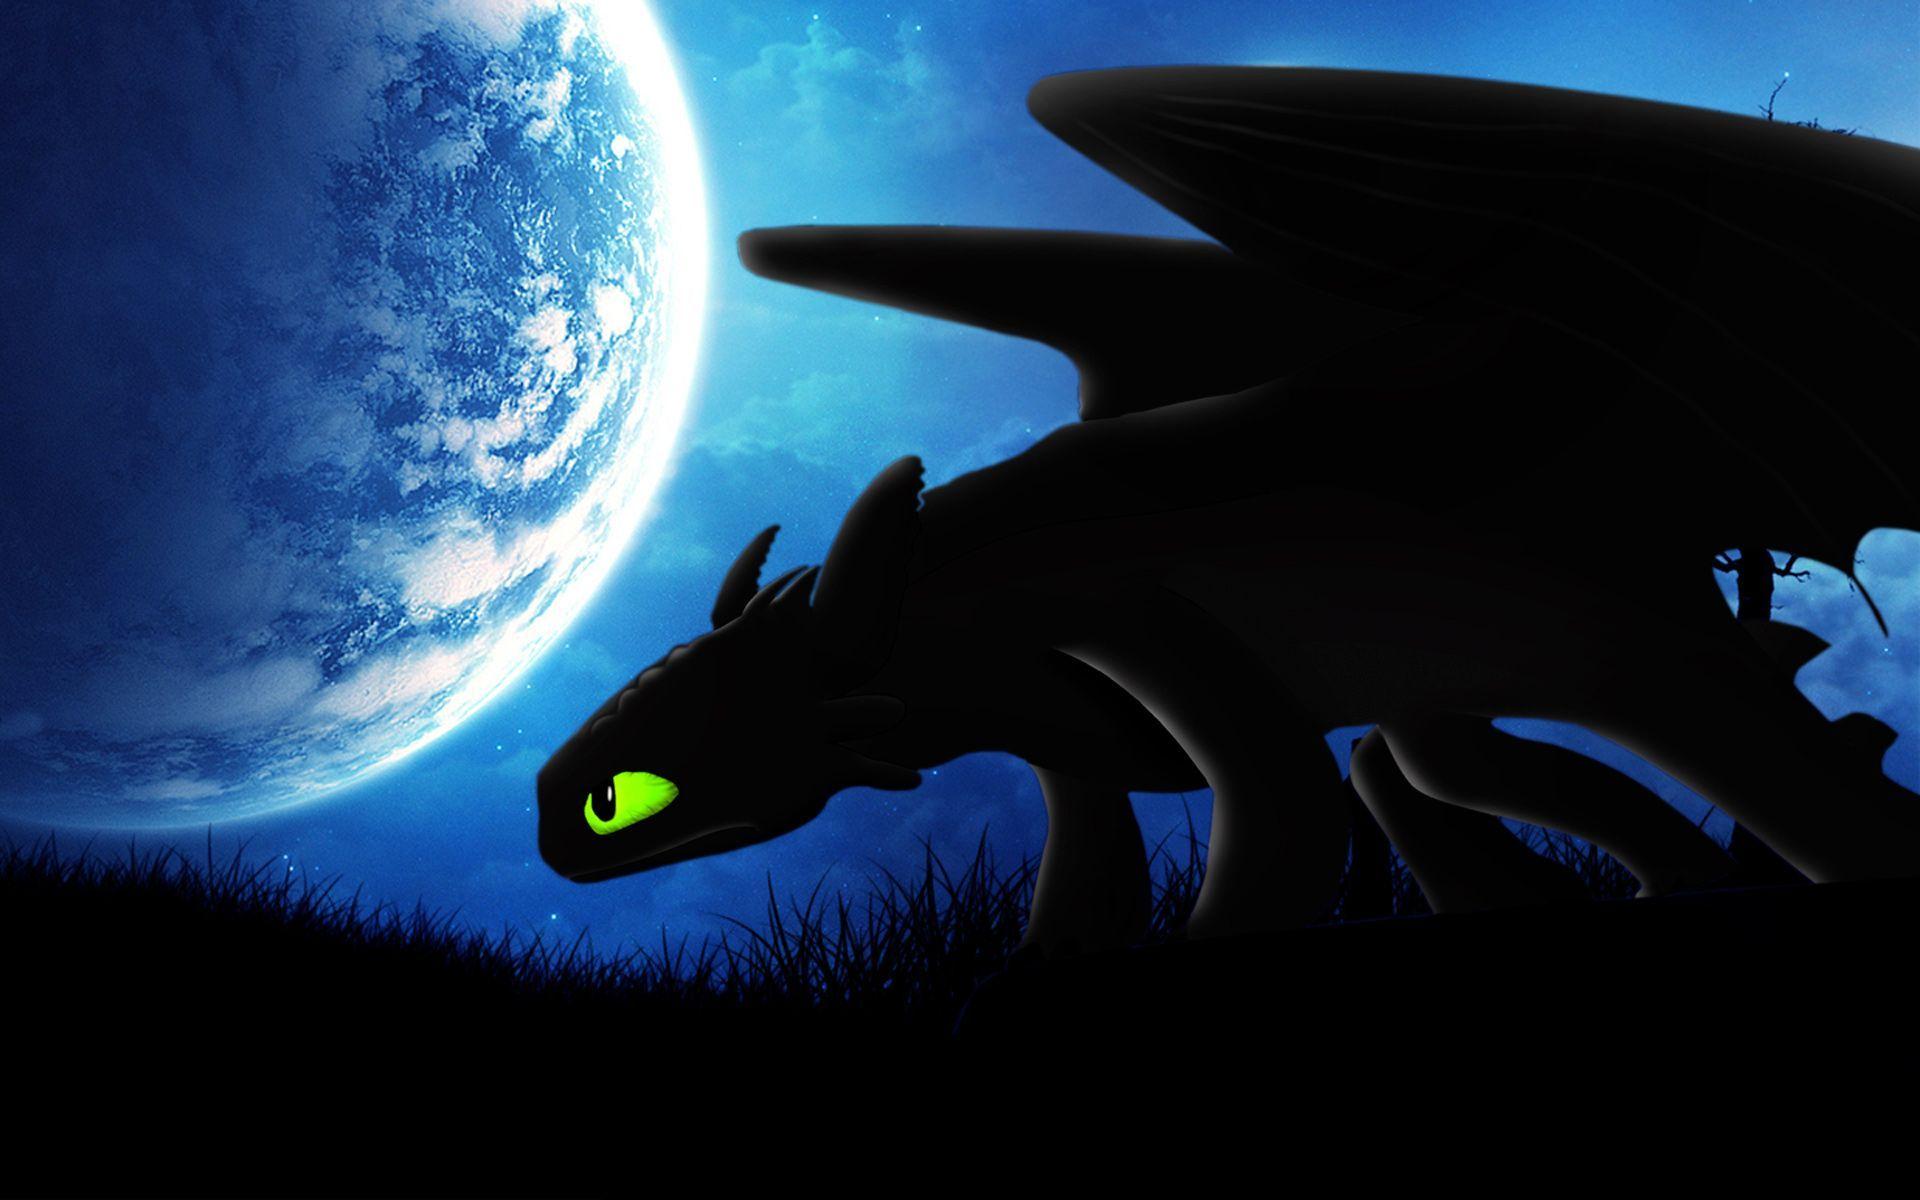 Dragons Wallpaper HD, Desktop Background, Image and Picture